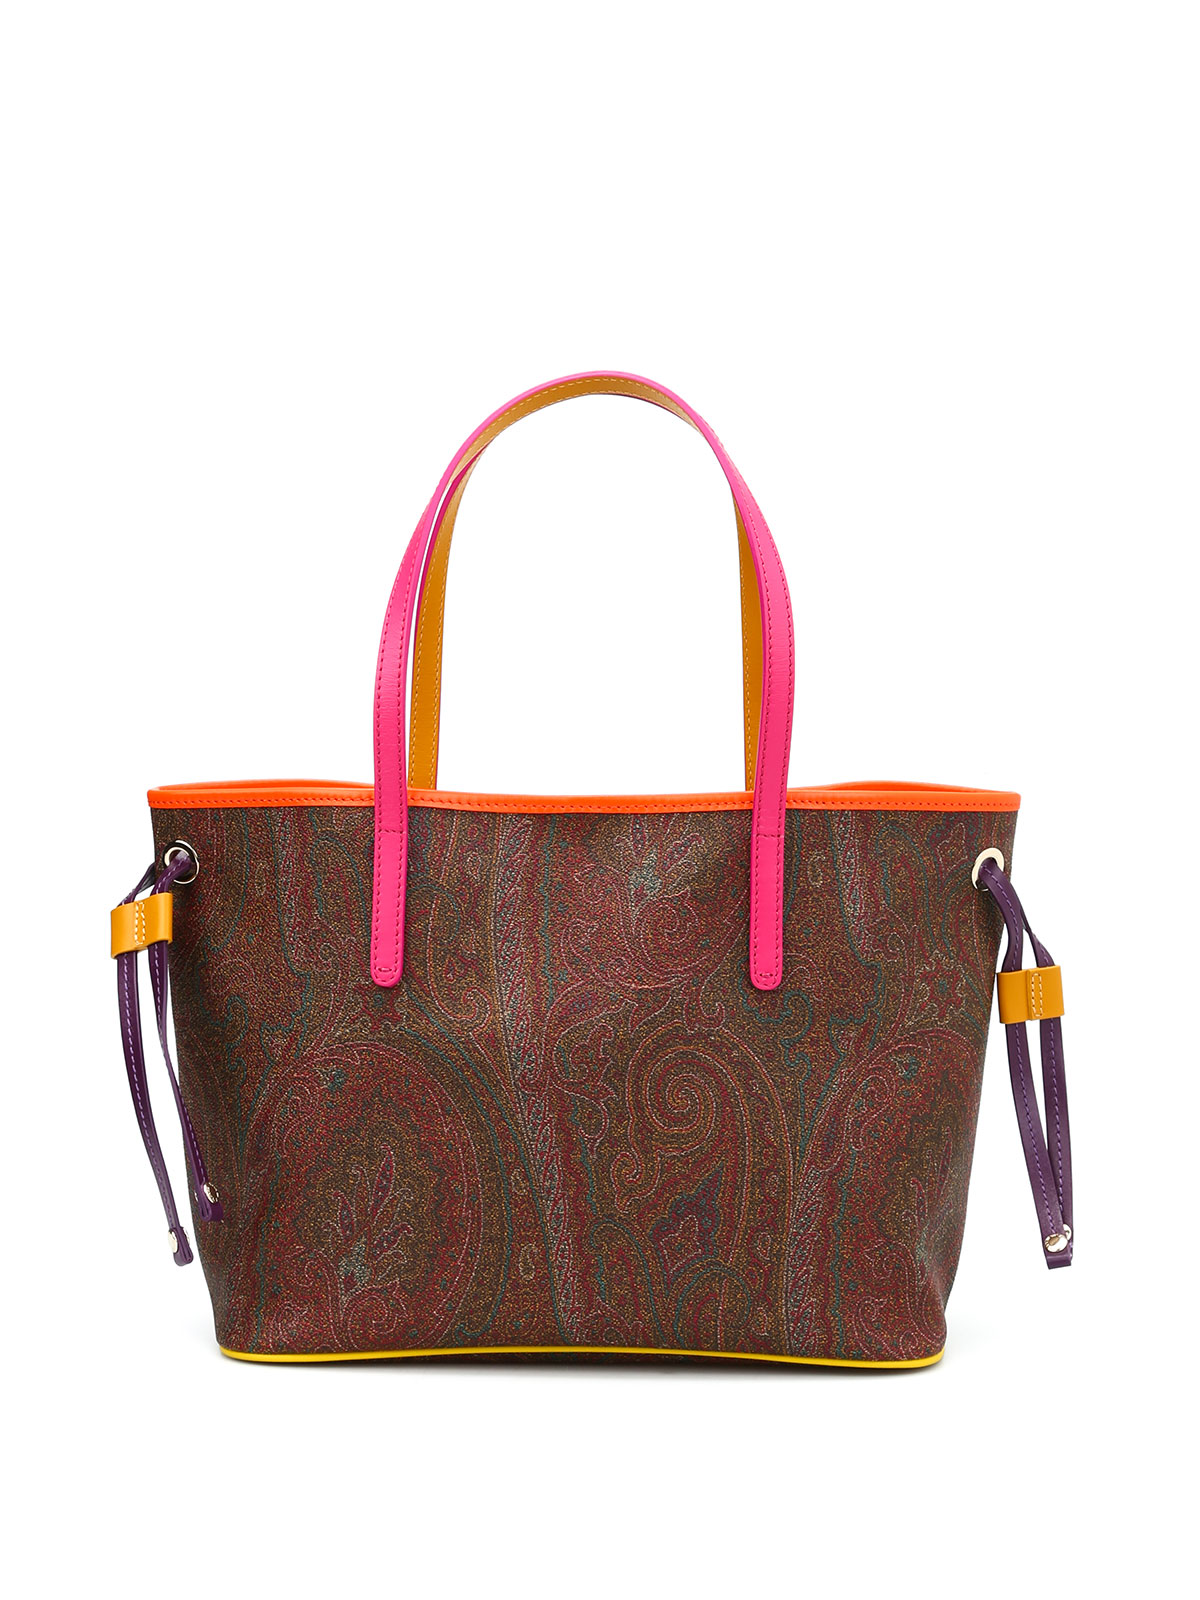 Save 45% Etro Synthetic Shopper Bag With Paisley Pattern in Metallic Womens Tote bags Etro Tote bags 